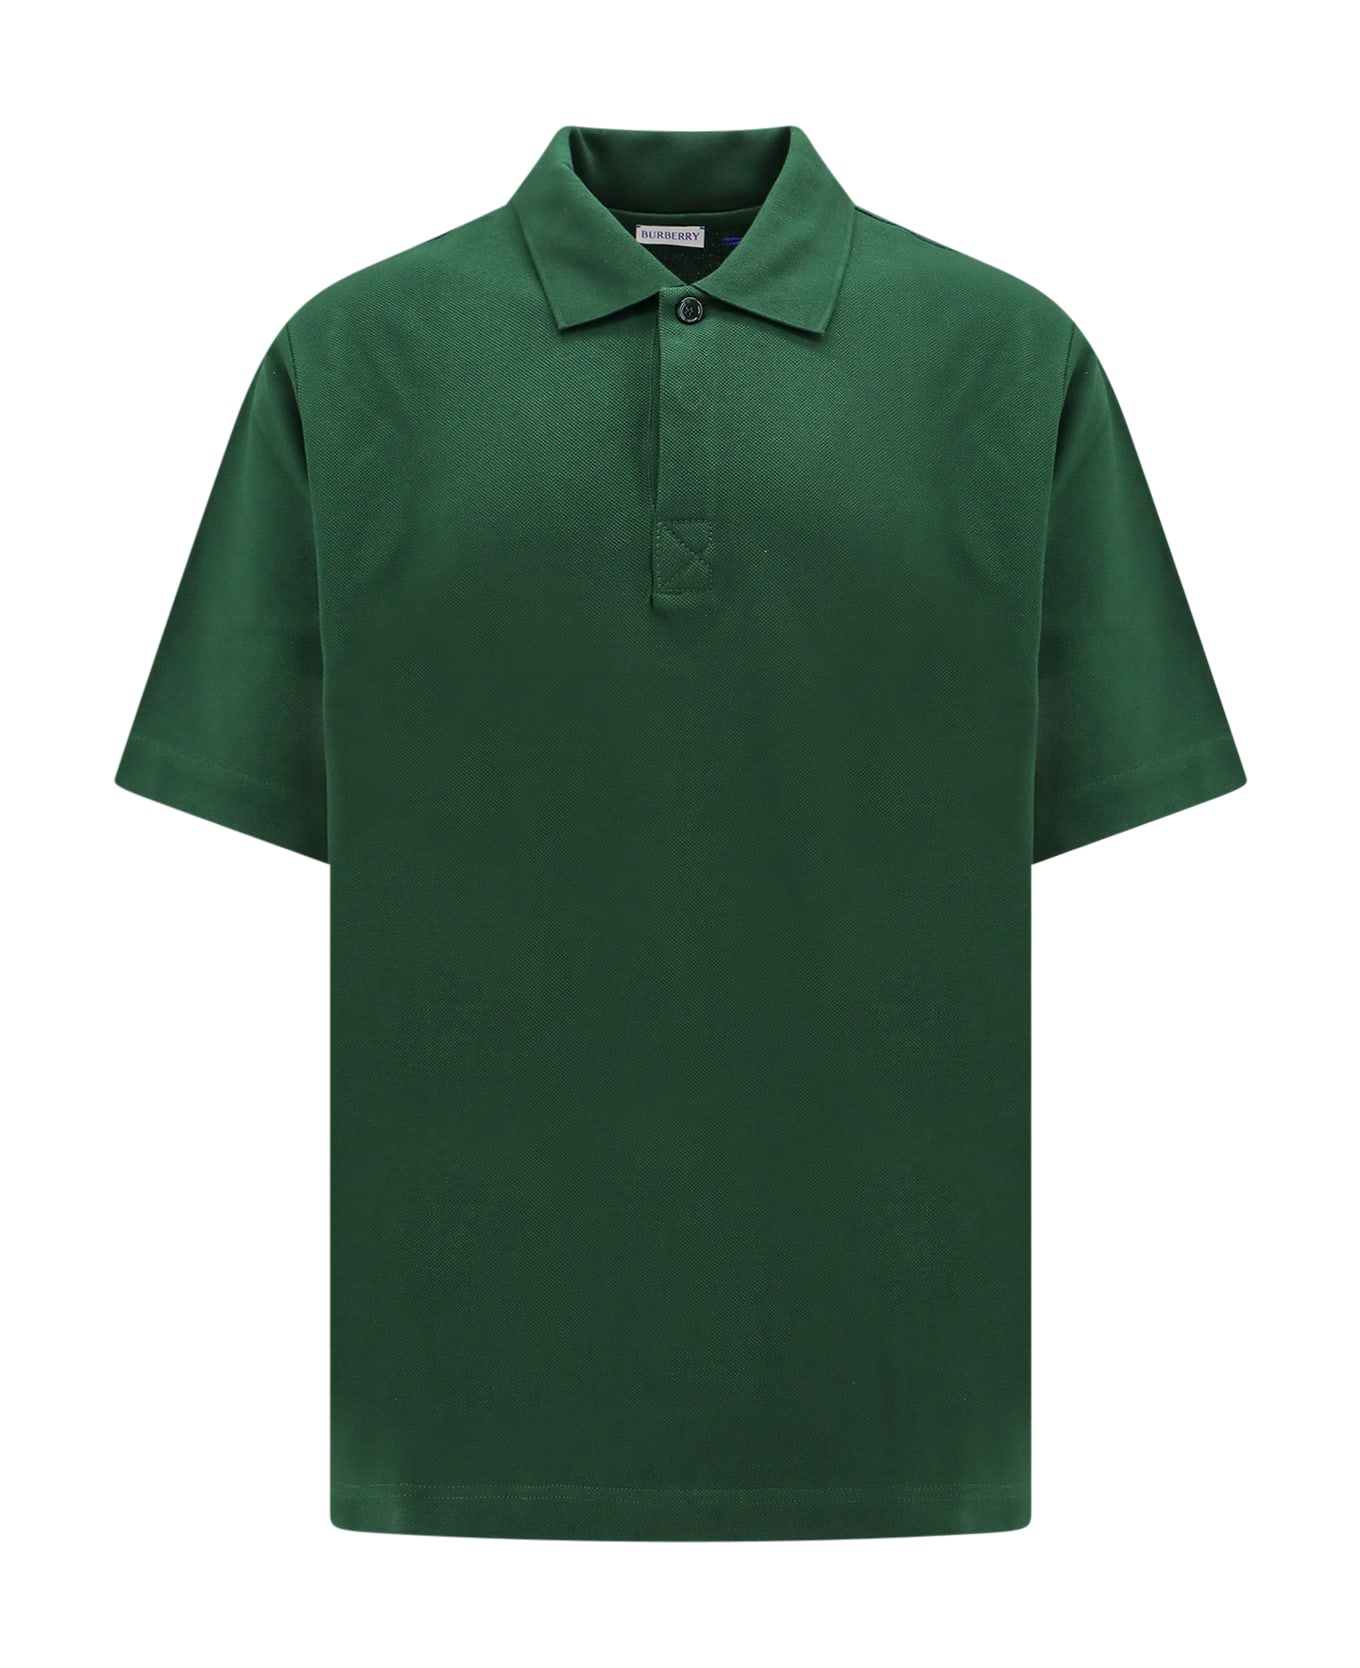 Burberry Polo Shirt - Green ポロシャツ